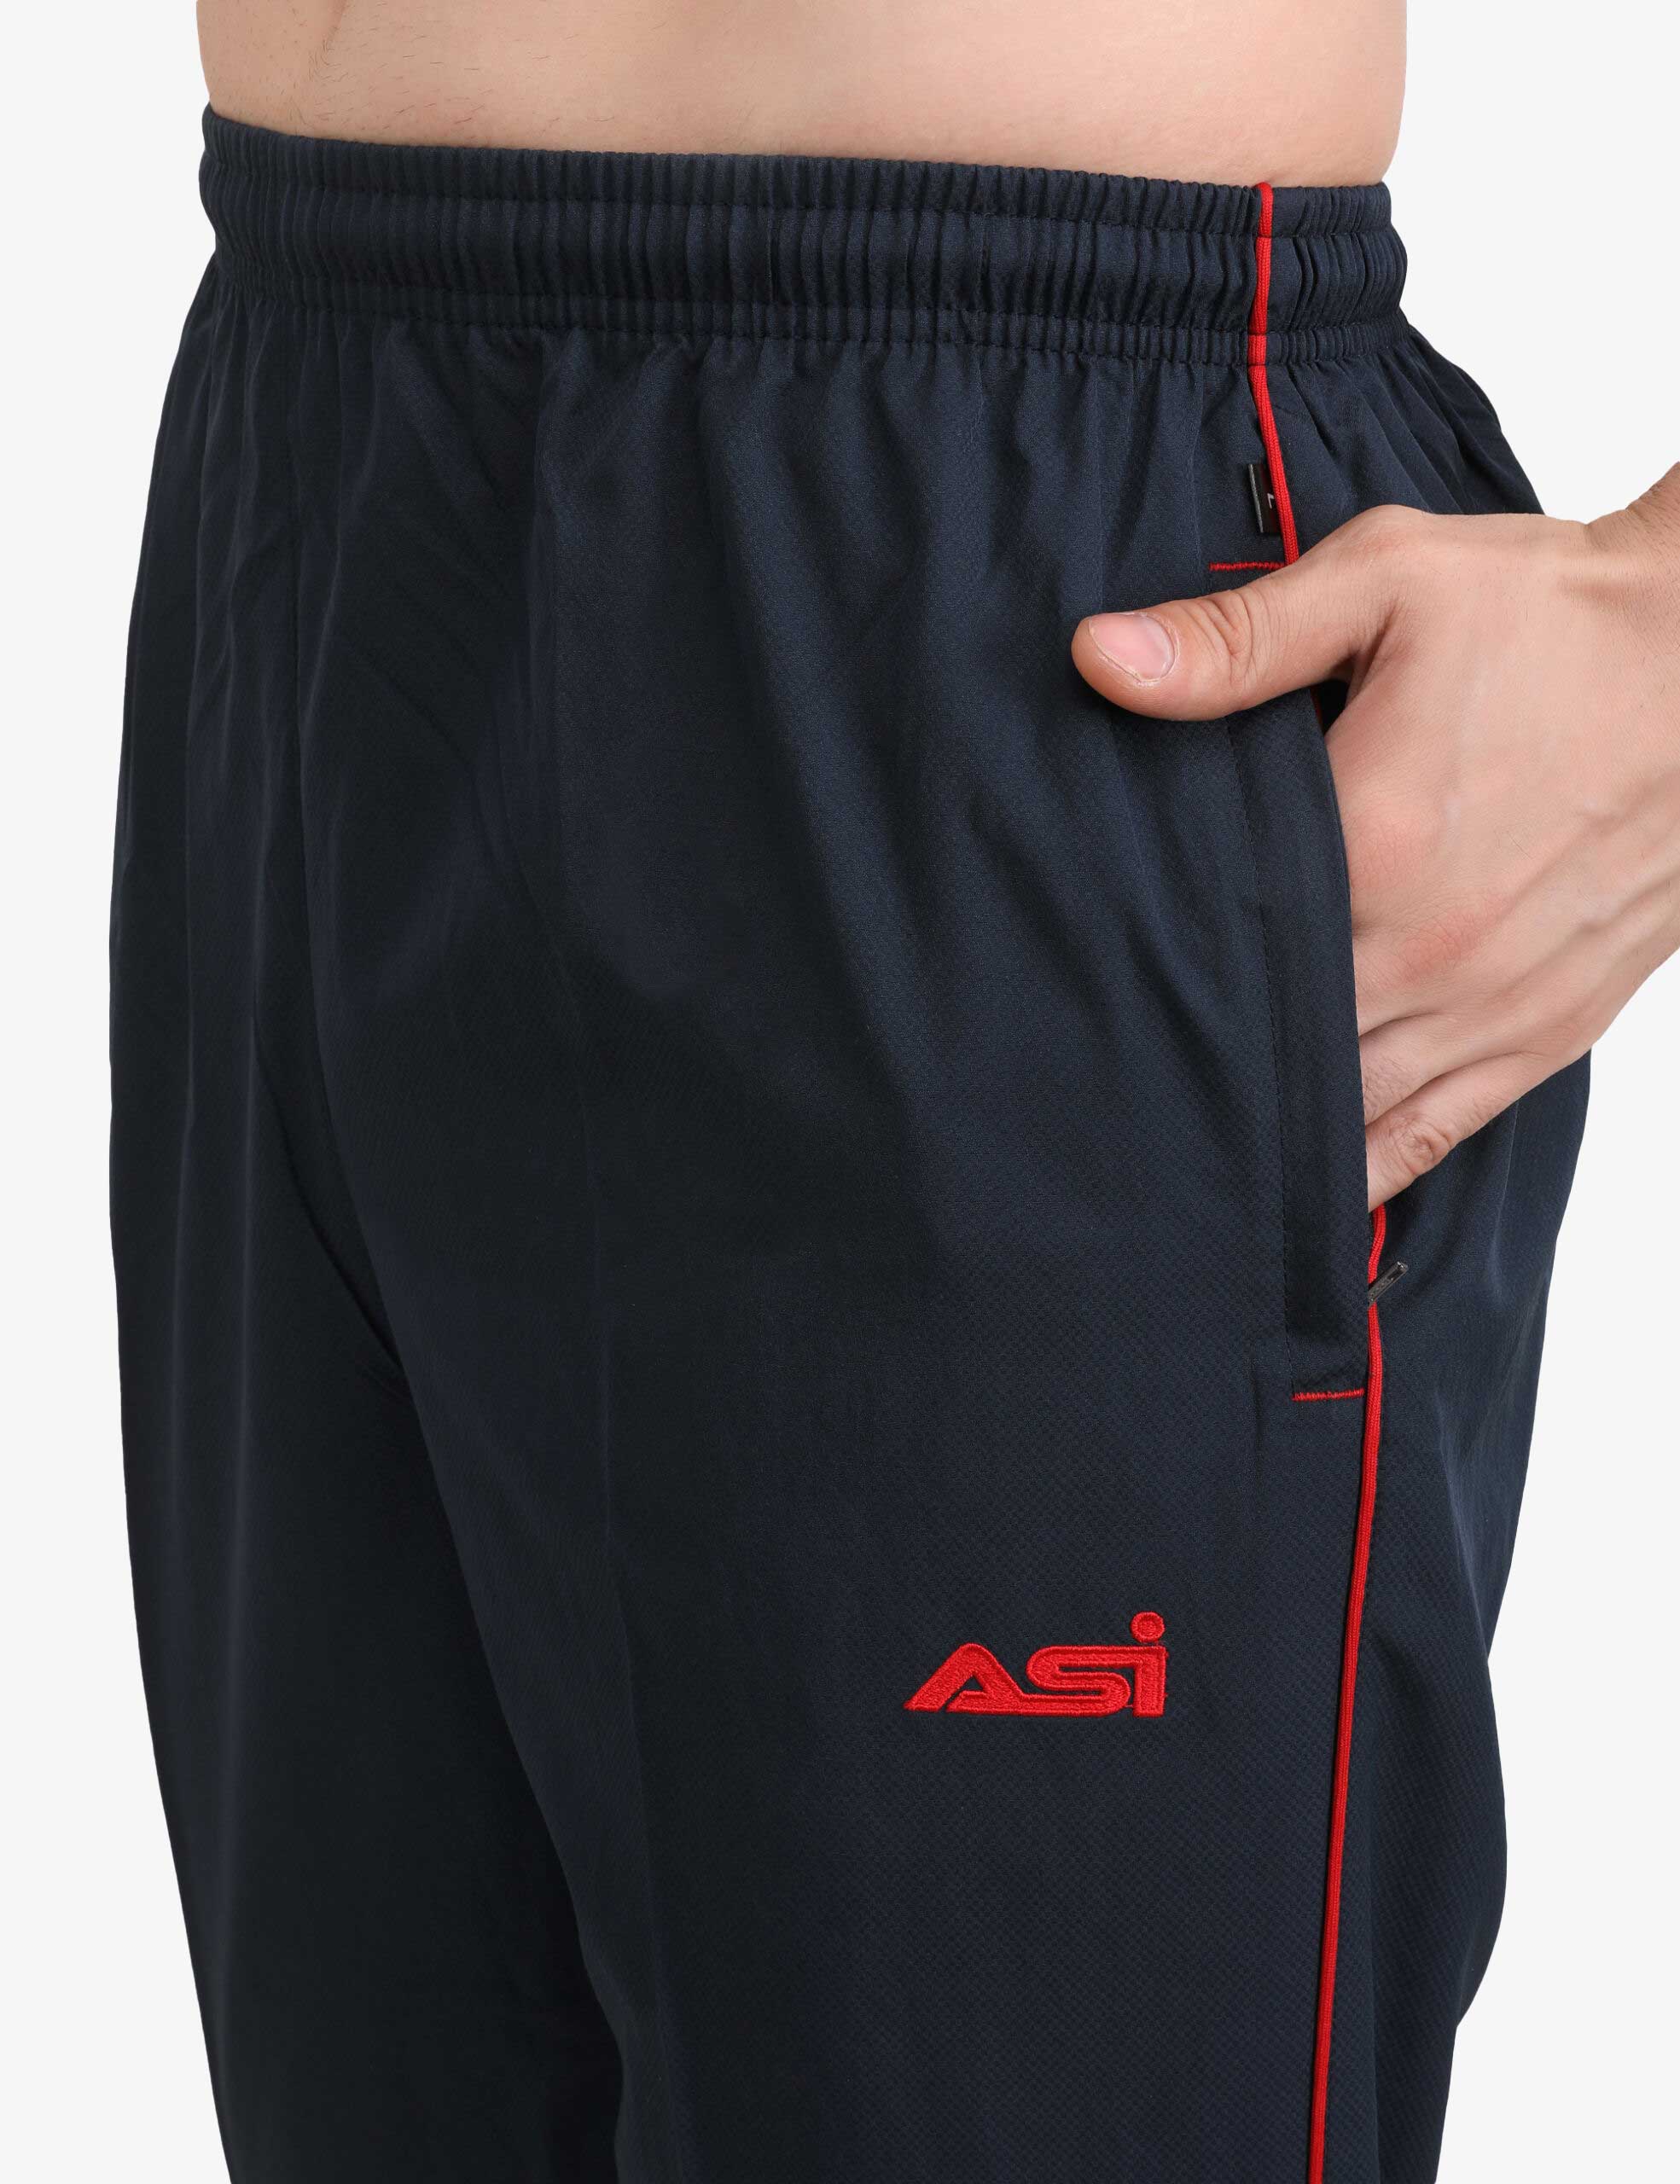 ASI Blend Lower Navy Blue and Red